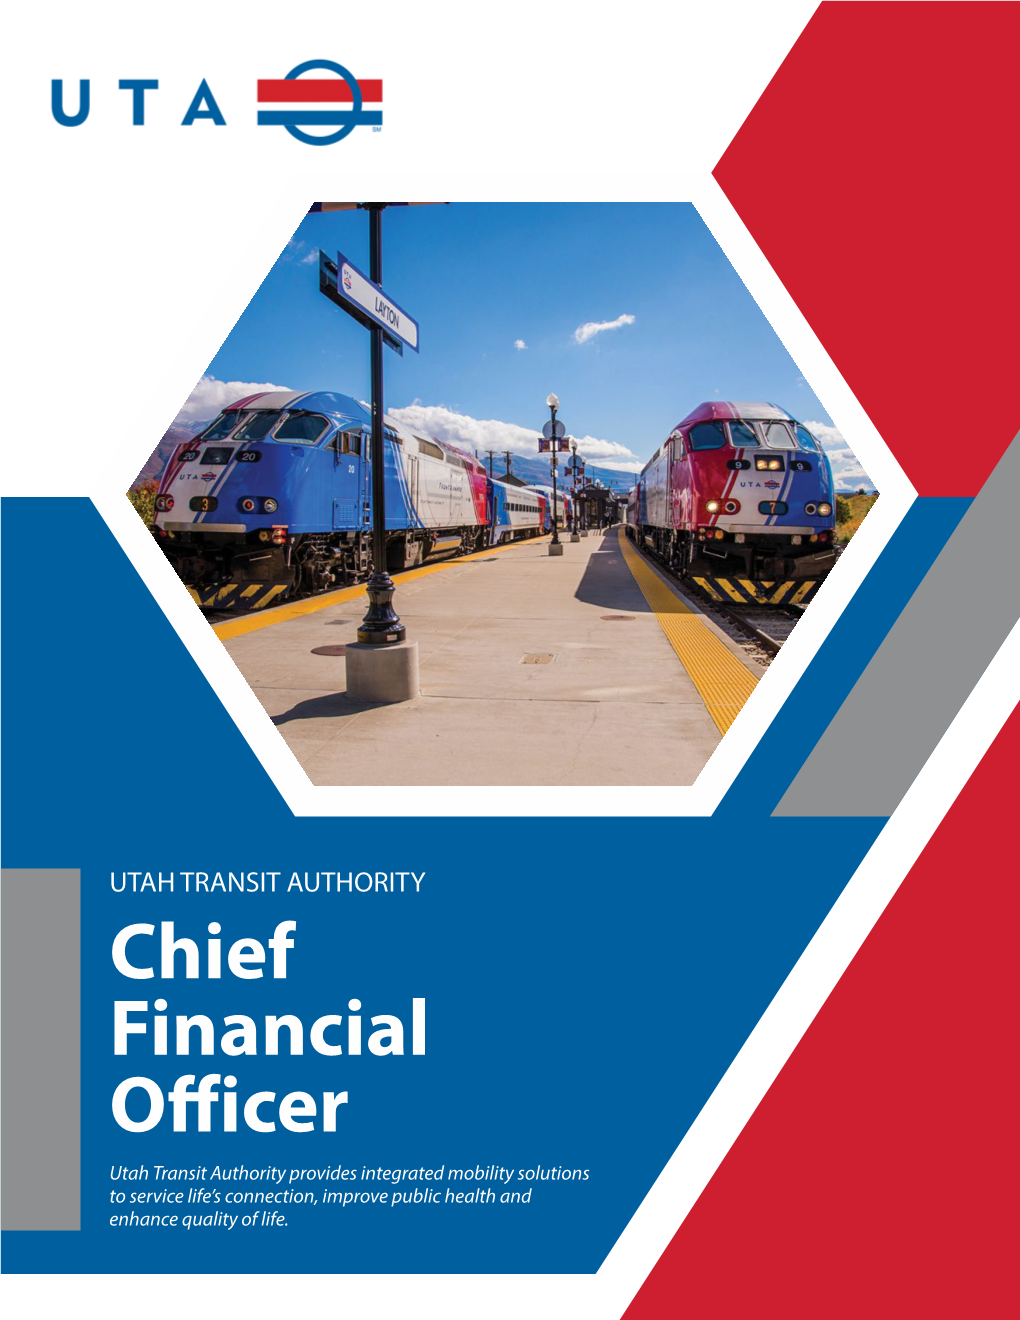 Chief Financial Officer Utah Transit Authority Provides Integrated Mobility Solutions to Service Life’S Connection, Improve Public Health and Enhance Quality of Life